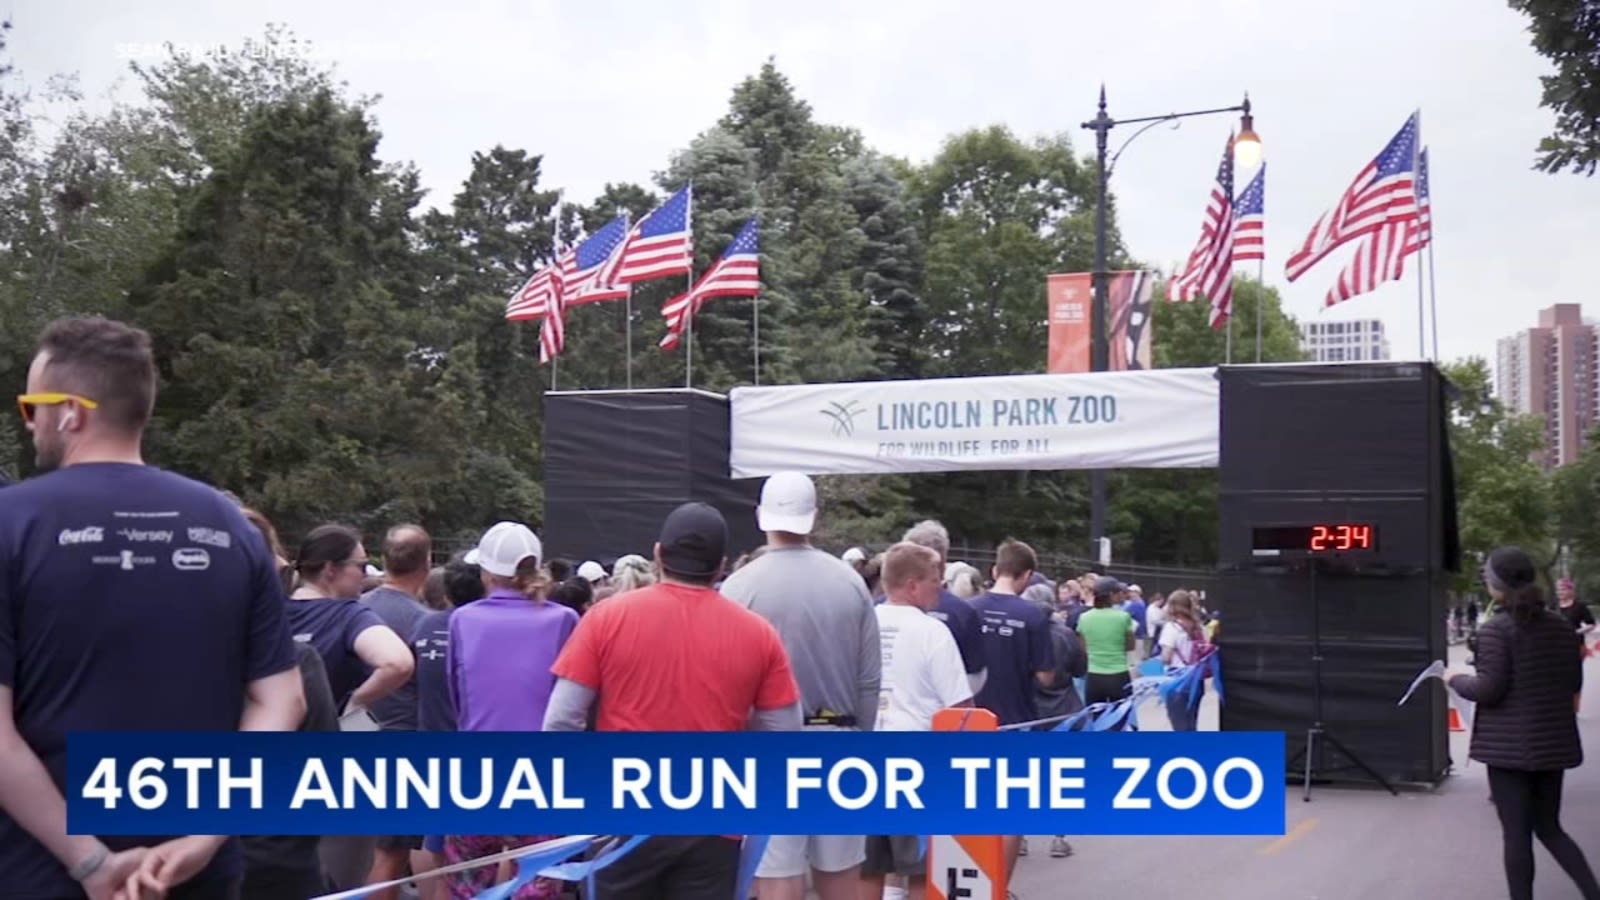 Thousands expected to participate in Lincoln Park Zoo's 46th Annual Run for the Zoo